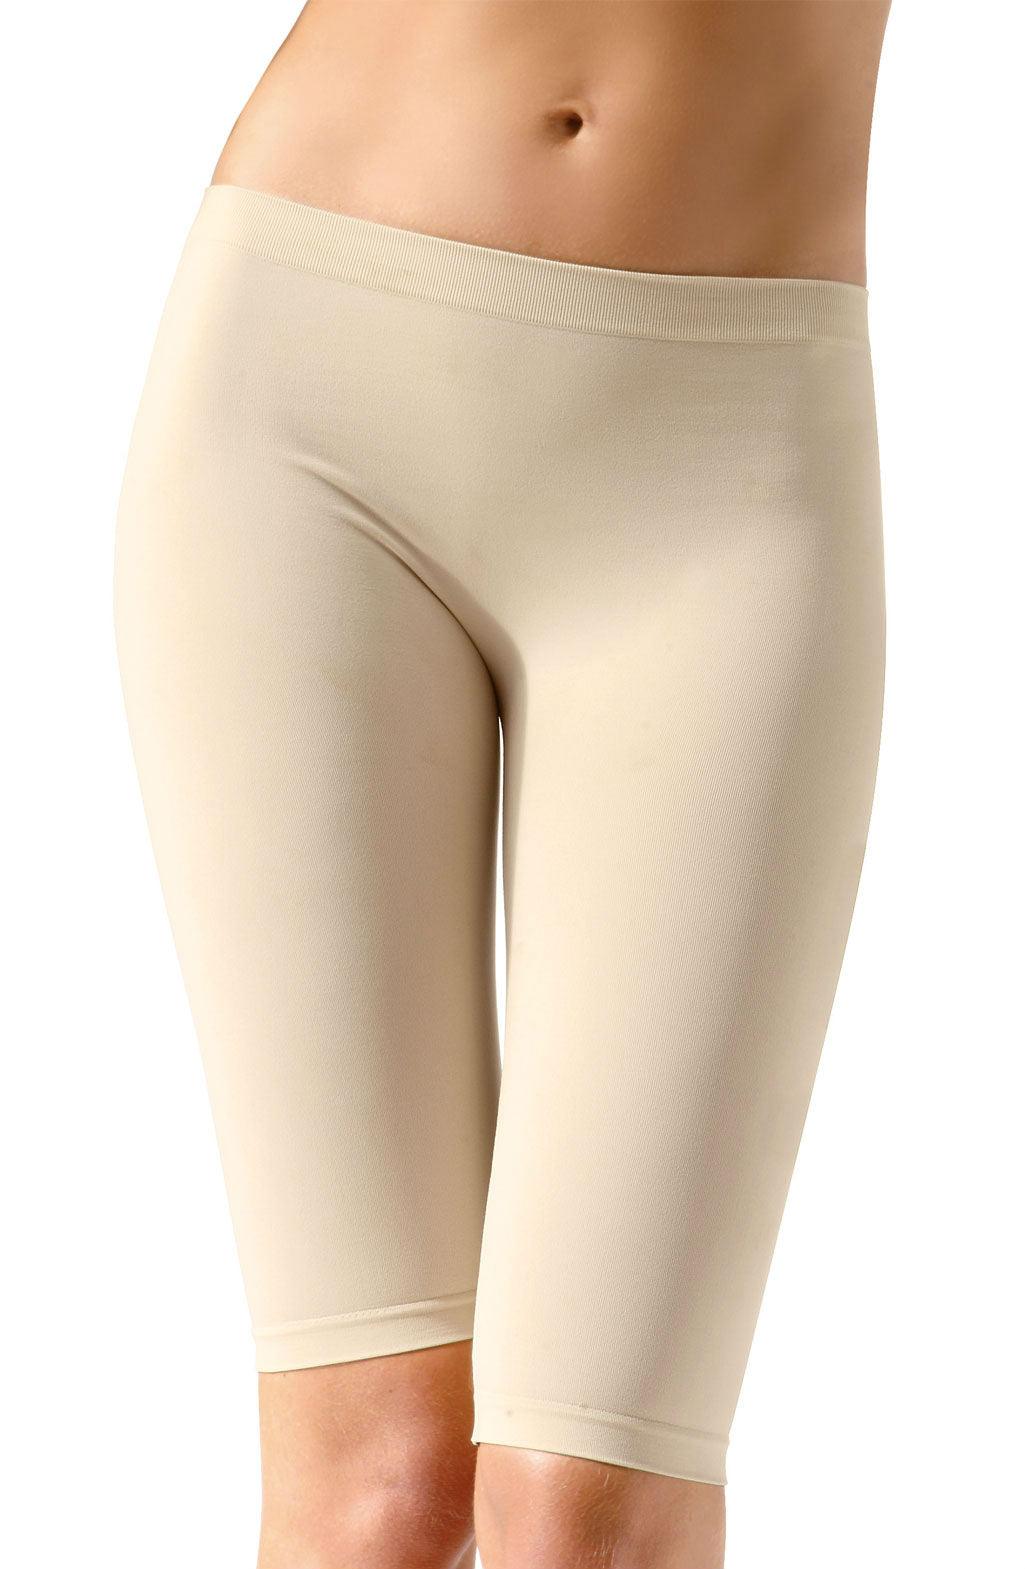 Control Body 410600A Infused Shaping Leggings Skin - Sydney Rose Lingerie 